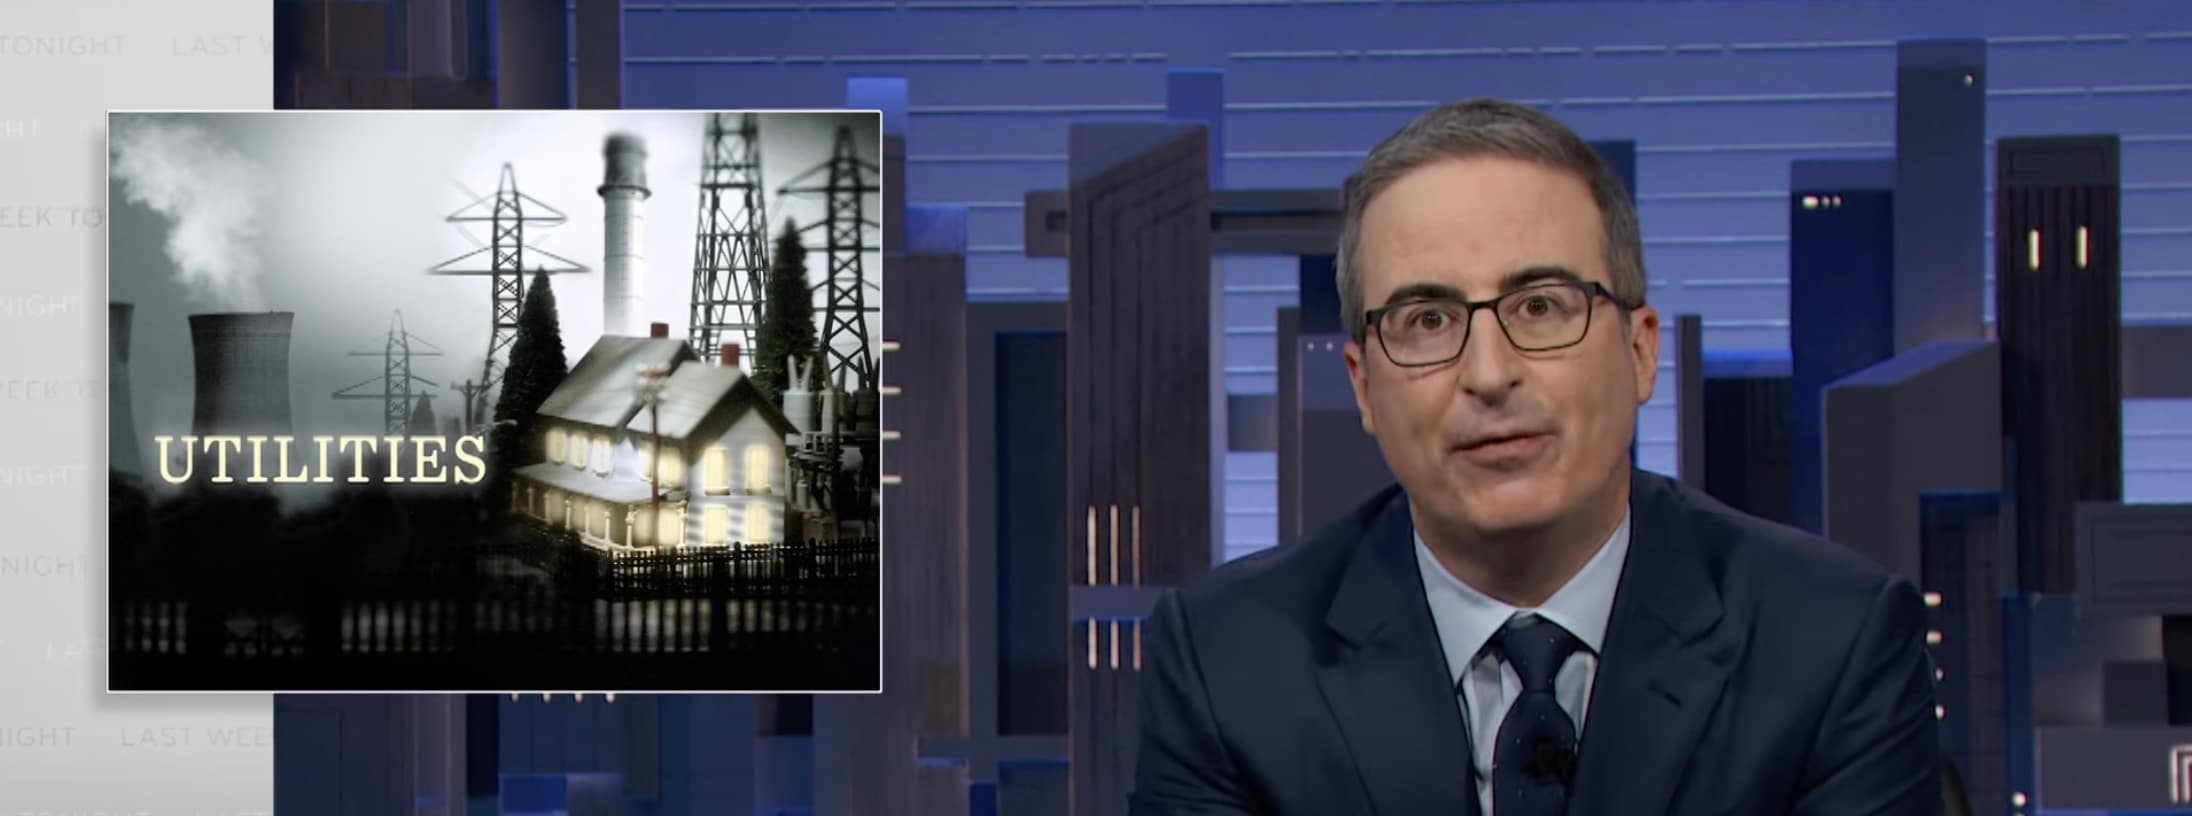 John Oliver discusses utility scandals with title card reading "Utilities" and images of electric infrastructure